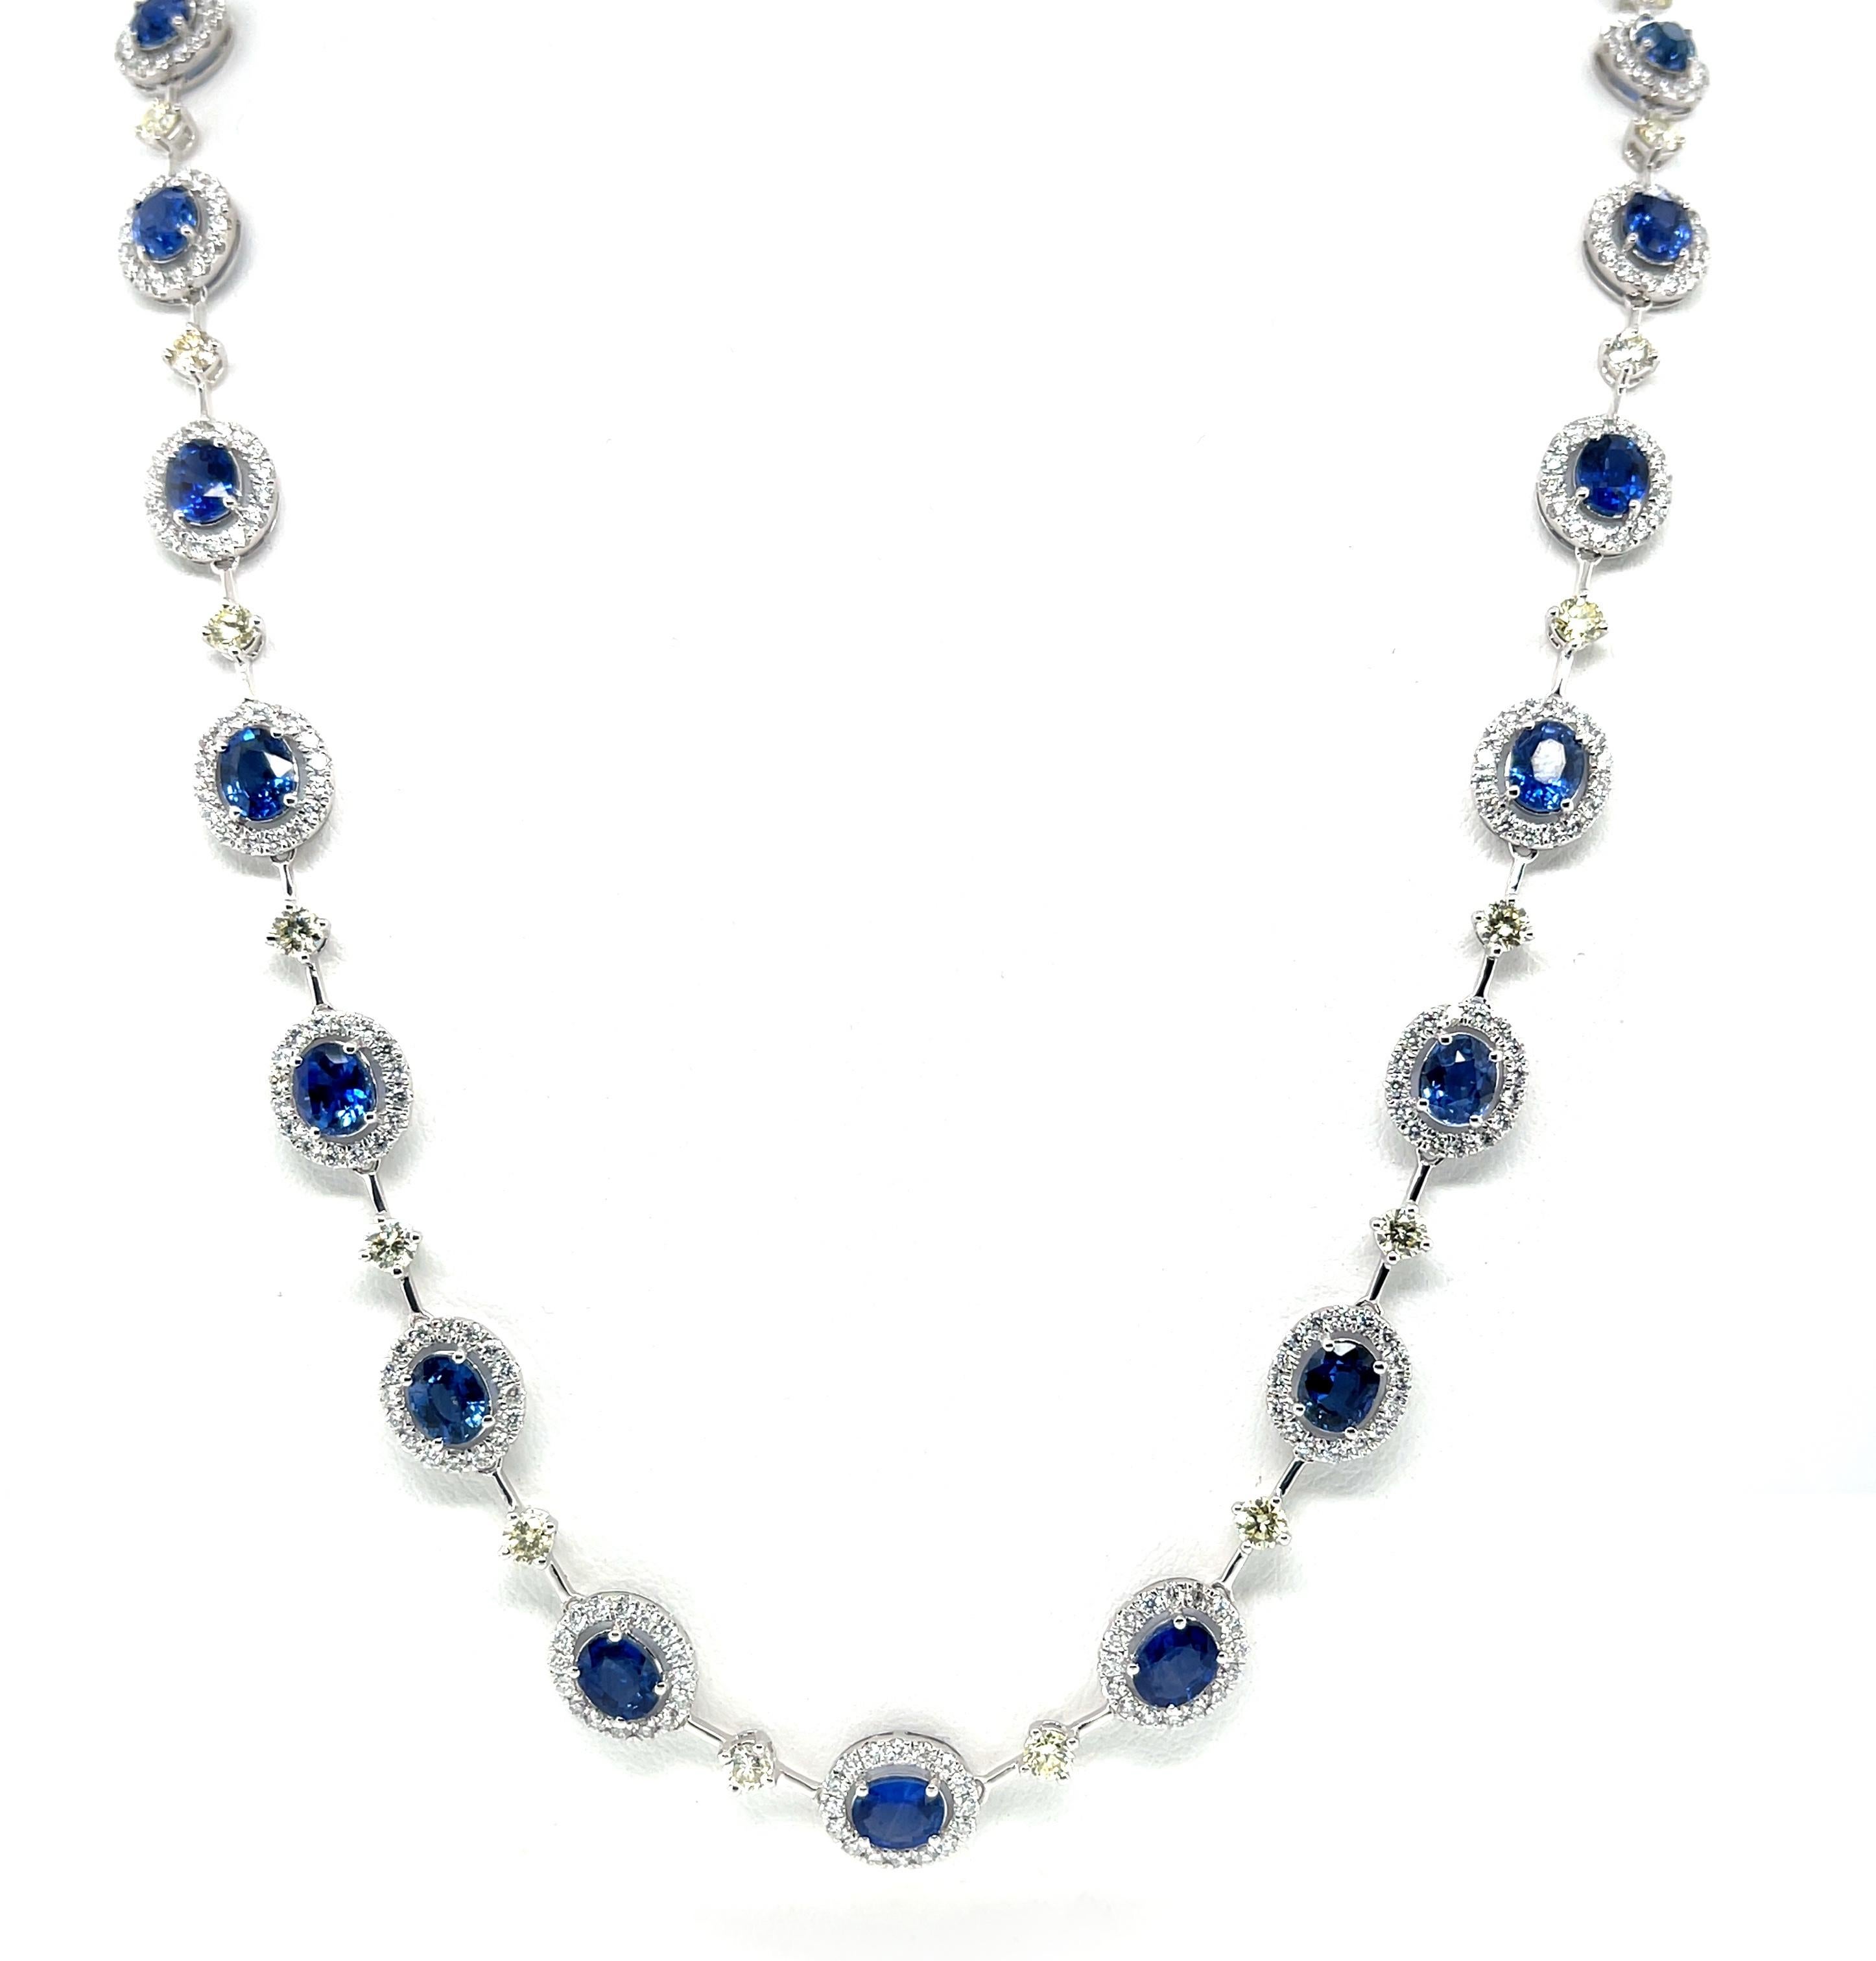 This spectacular blue sapphire and diamond Riviera necklace epitomizes luxury, class and style! The 24 beautifully matched oval sapphires weigh over 12 carats total and possess quintessential cornflower blue color that connoisseurs think of when